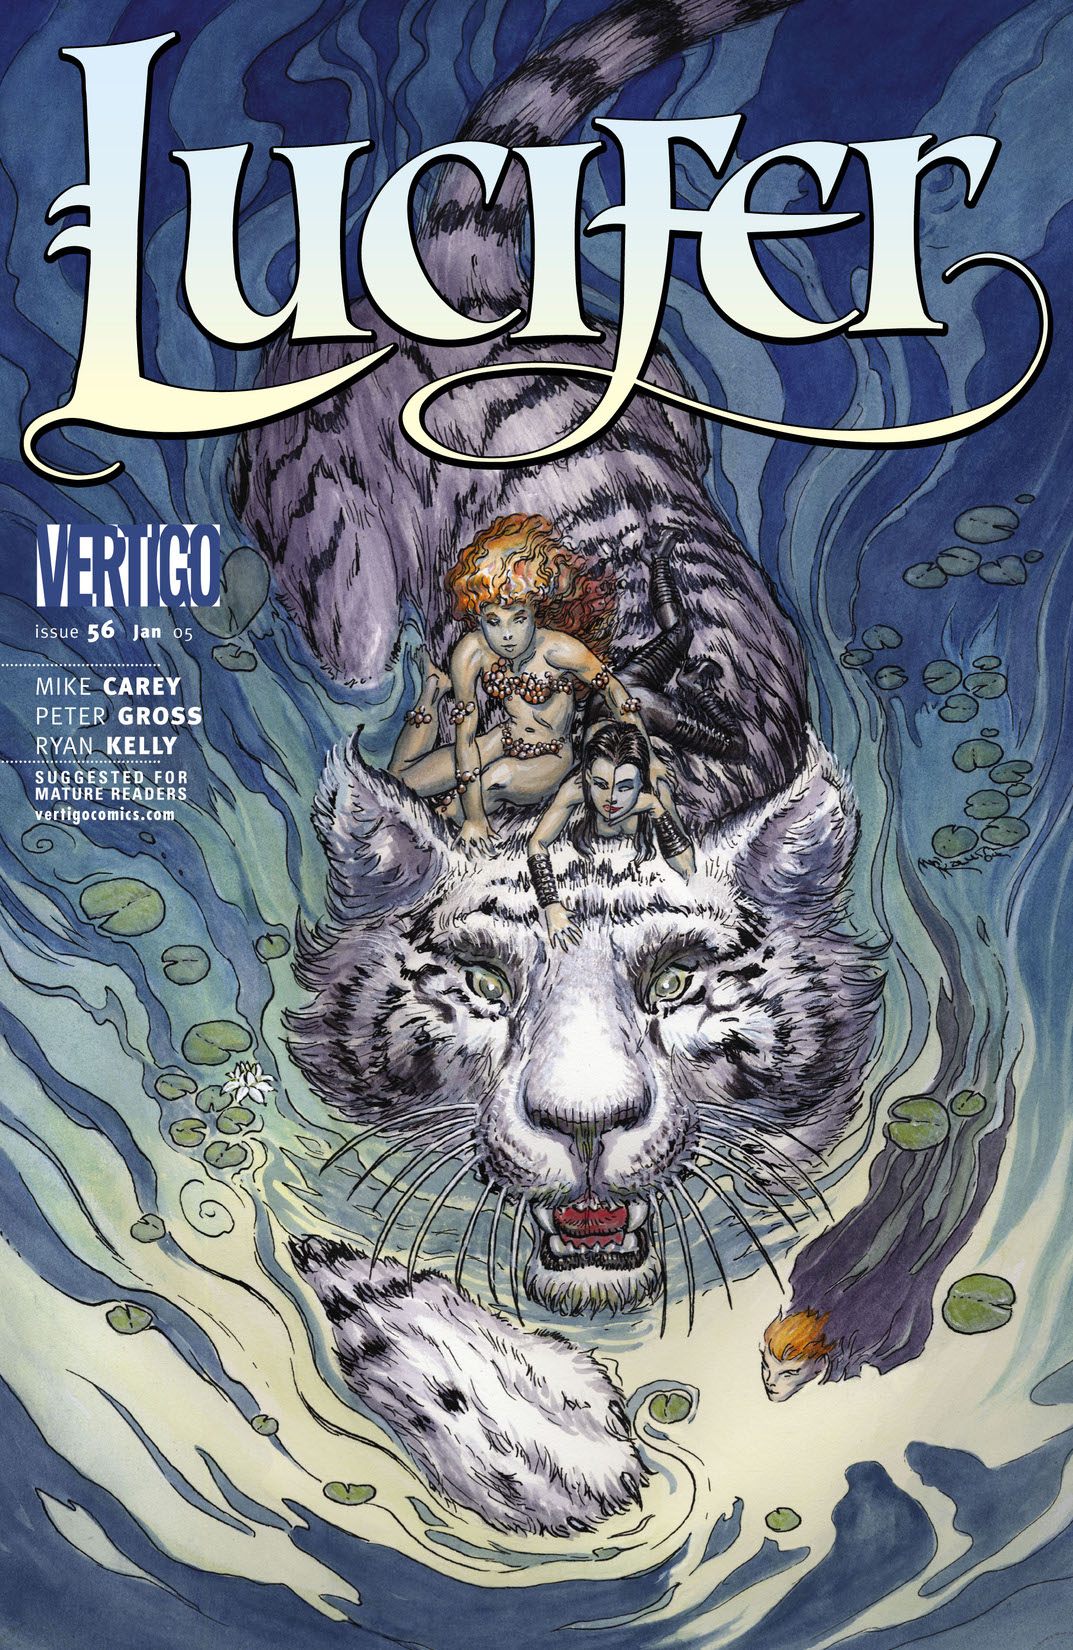 Lucifer #56 preview images